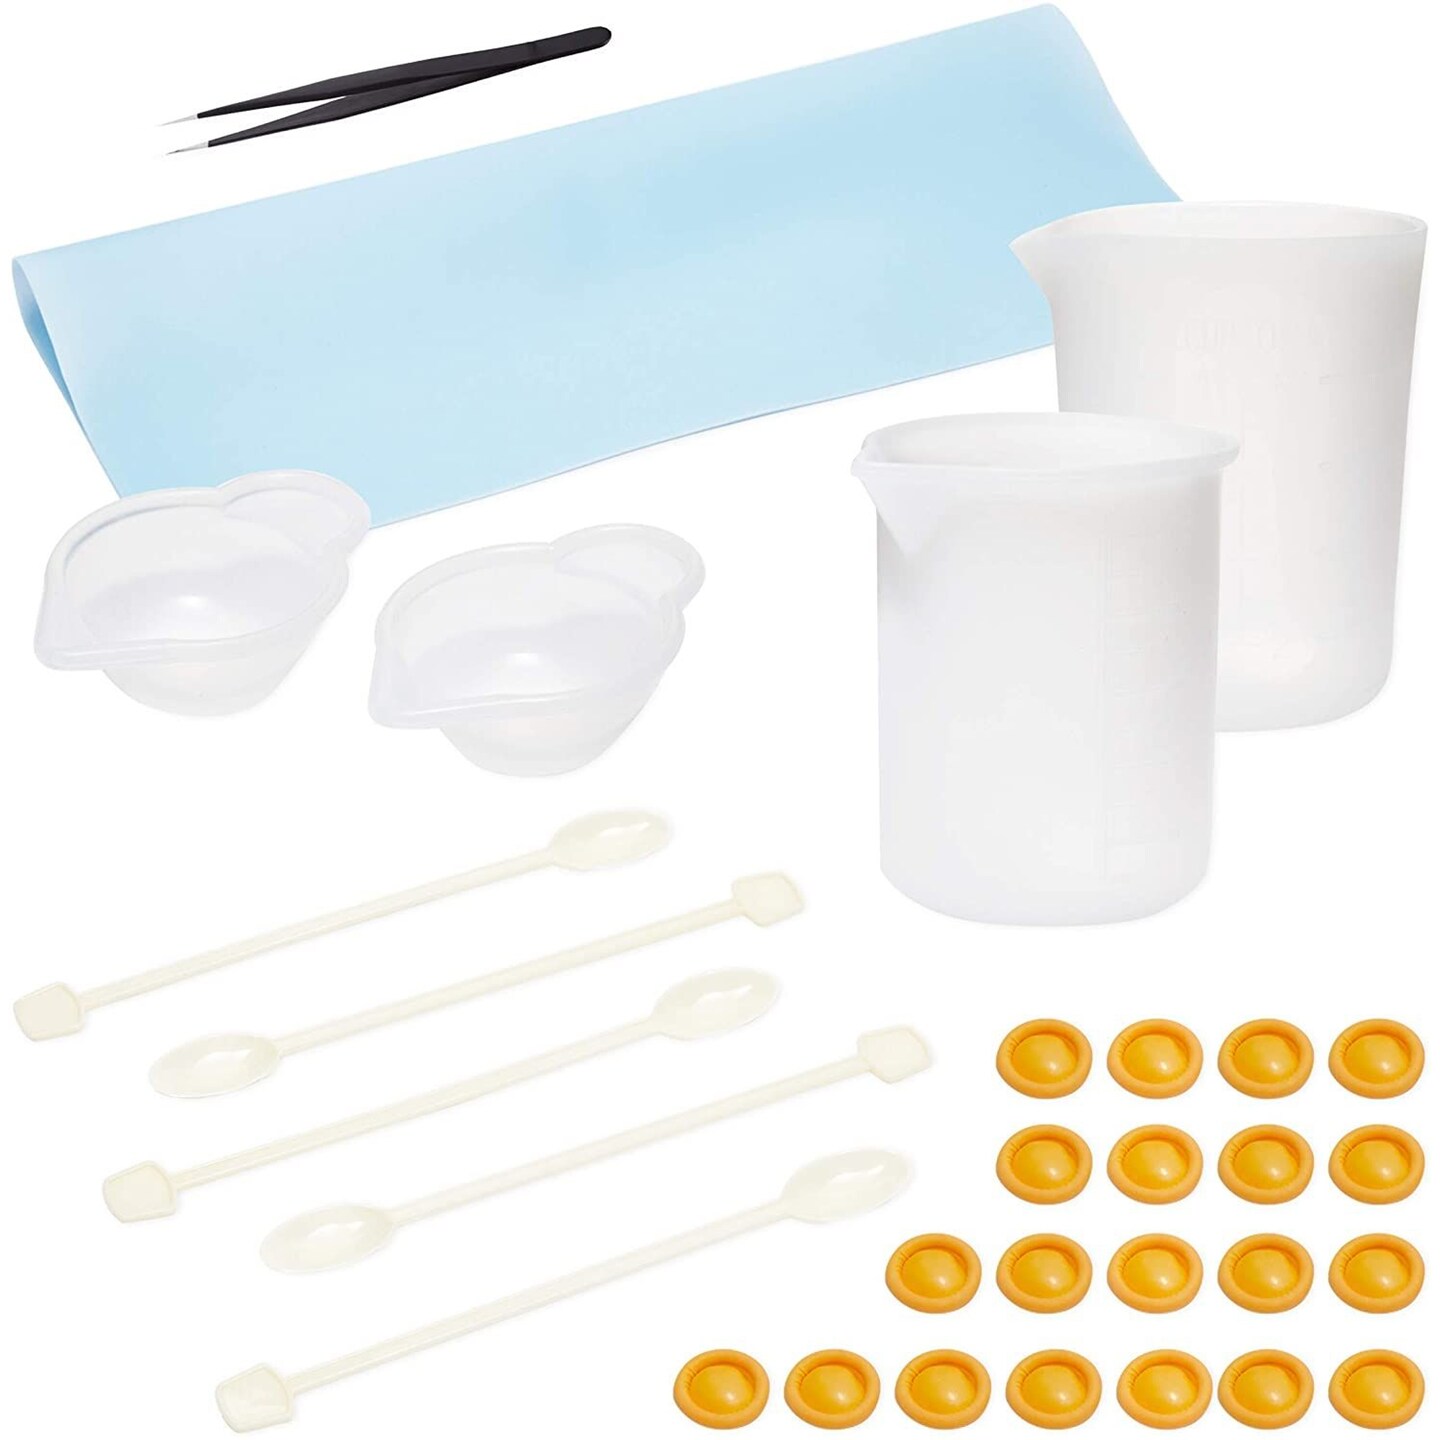 31 Pcs Silicone Resin Molds Kit Tools with Measuring Cup, Mixing Spoons,  Tweezers, DIY Jewelry Making